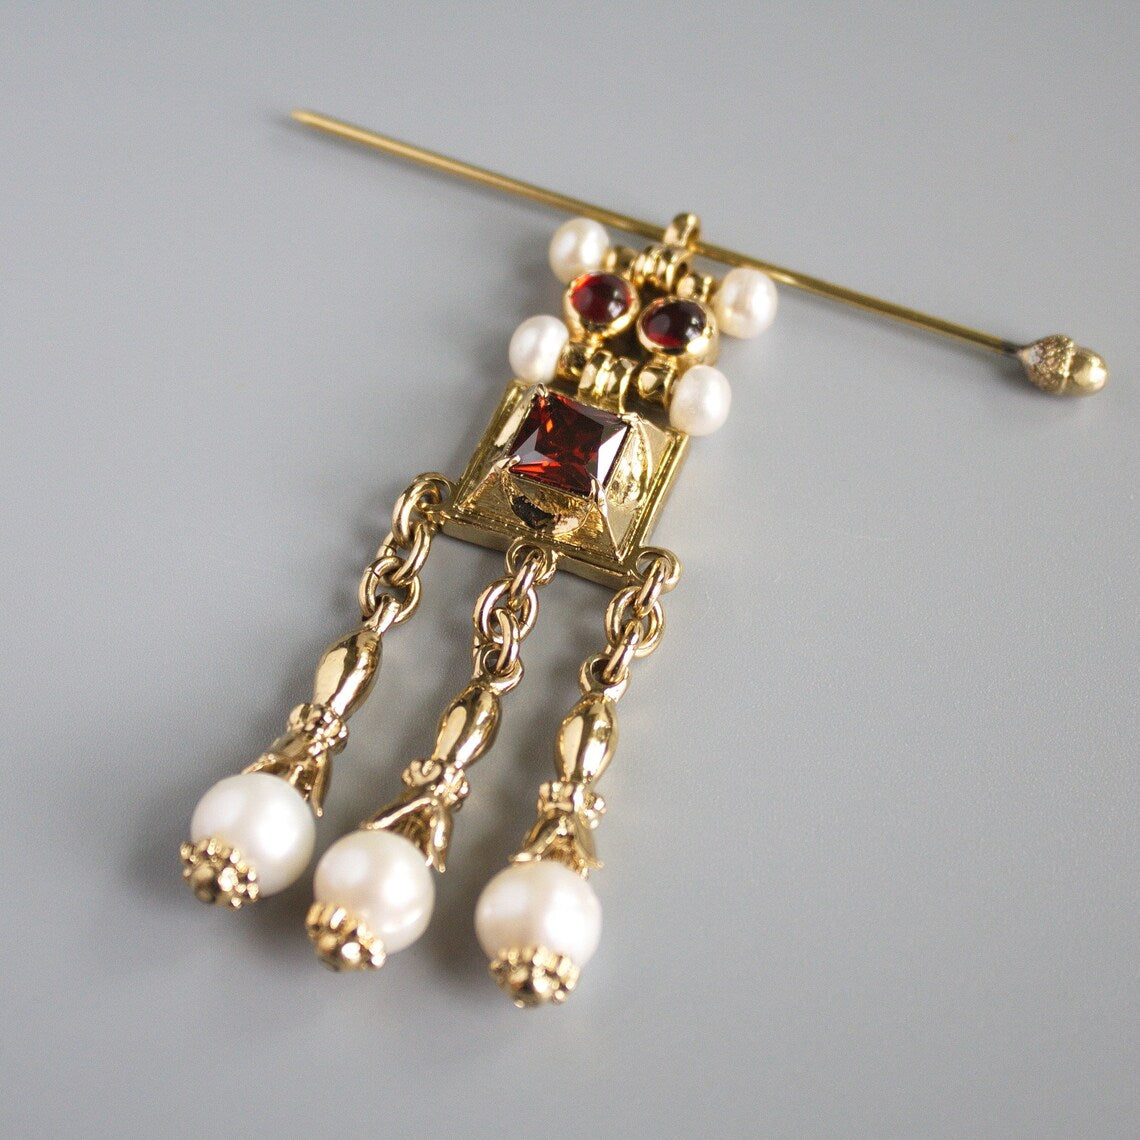 Renaissance Pendant Brooch with Red Stone and Pearls